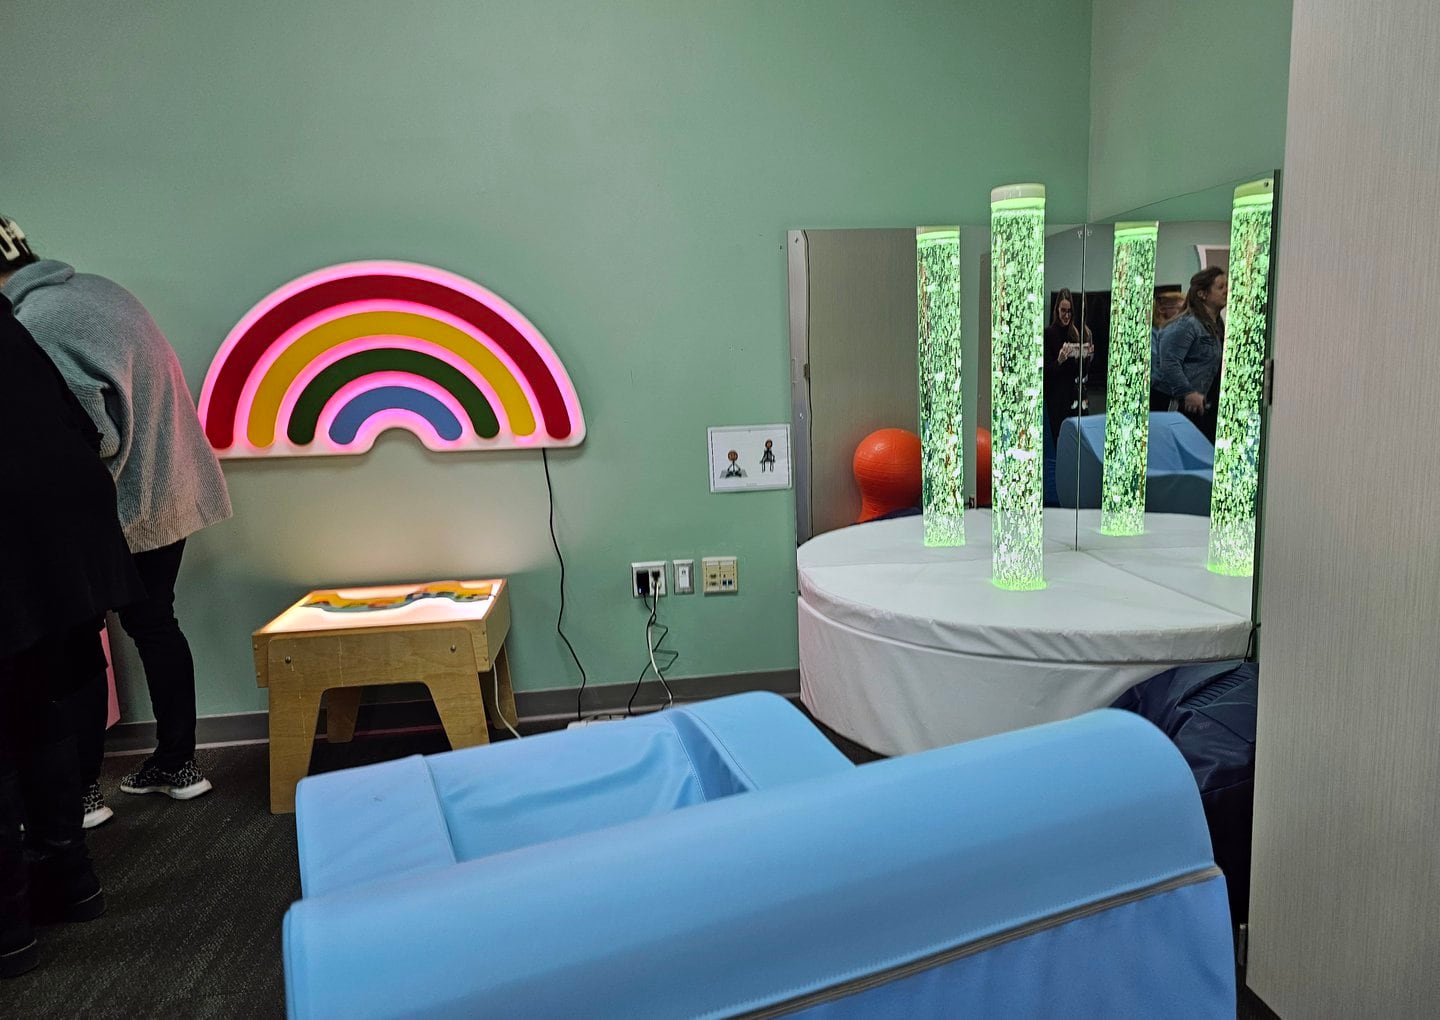 A room with blue walls and different sensory learning tools.